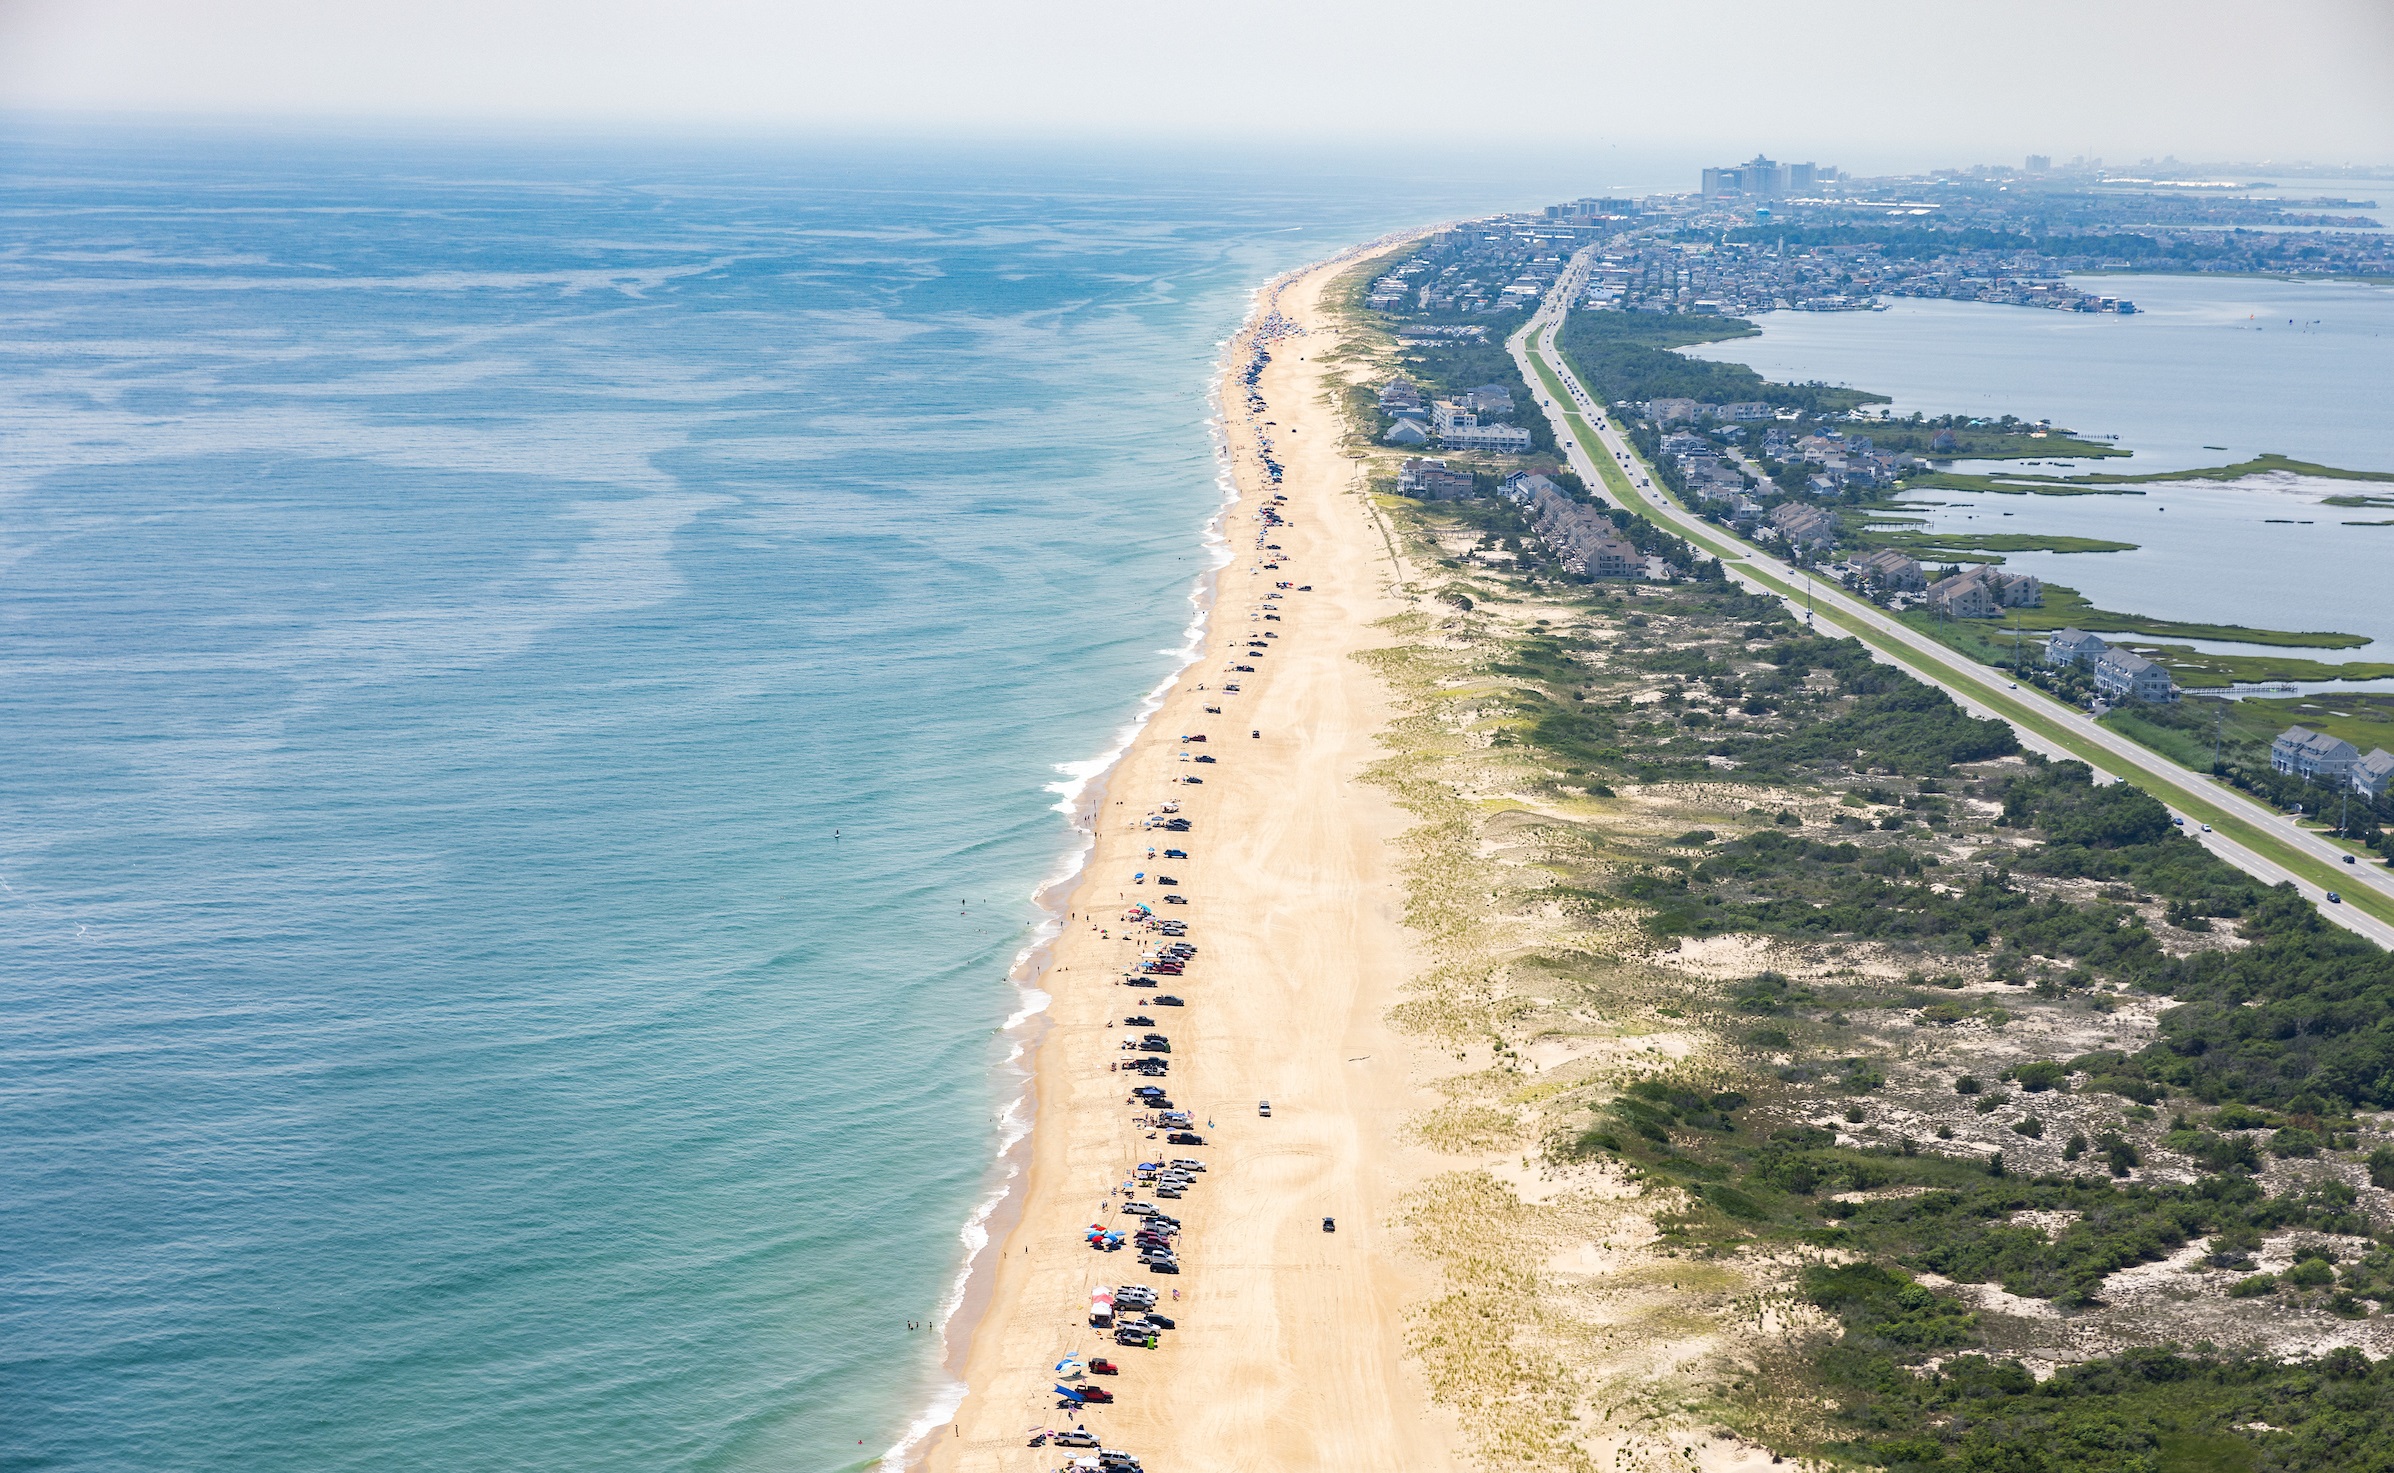 An overhead shot of the downstate Delaware coastline with drive-on surf anglers along the beach, which is pictured vertically up the center of the photo,with the Atlantic Ocean to the left and Route 1 surrounded by natural vegetation to the right.